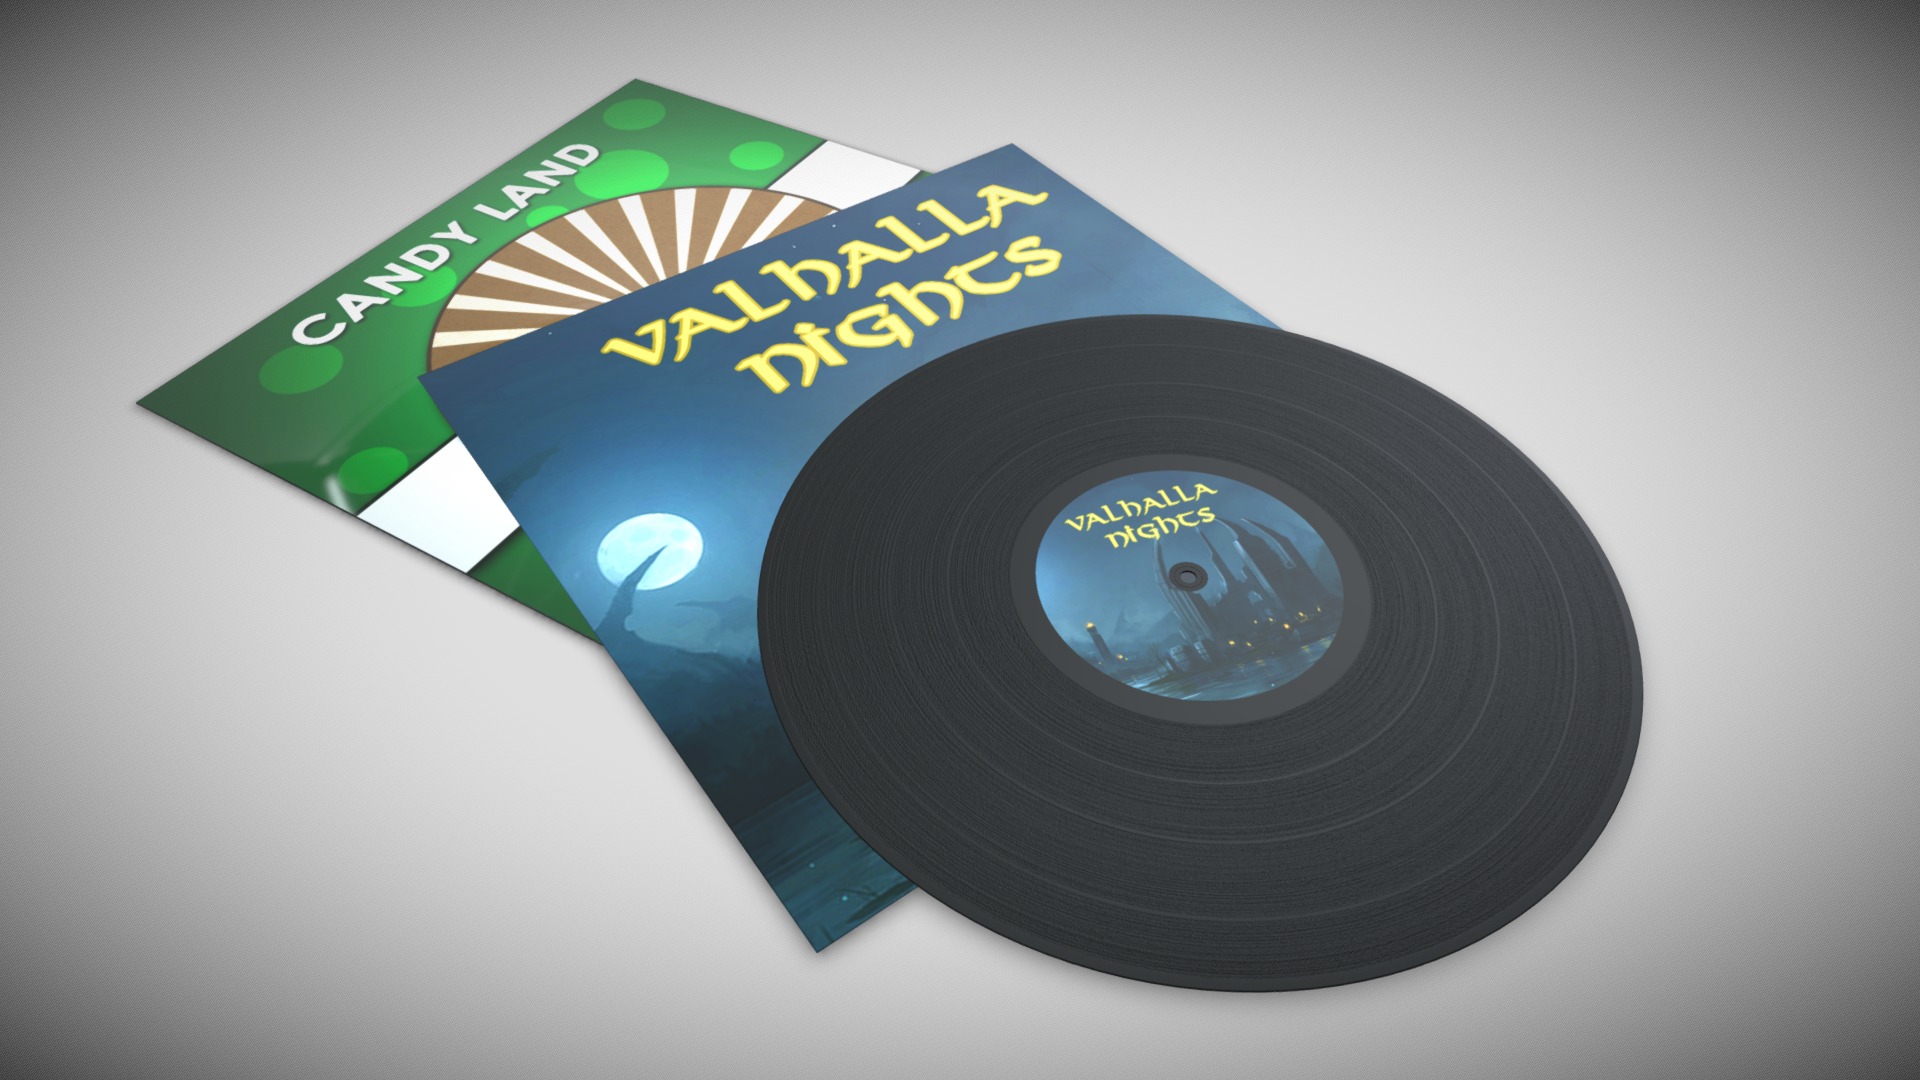 3D model Vinyl record - This is a 3D model of the Vinyl record. The 3D model is about a cd on a table.